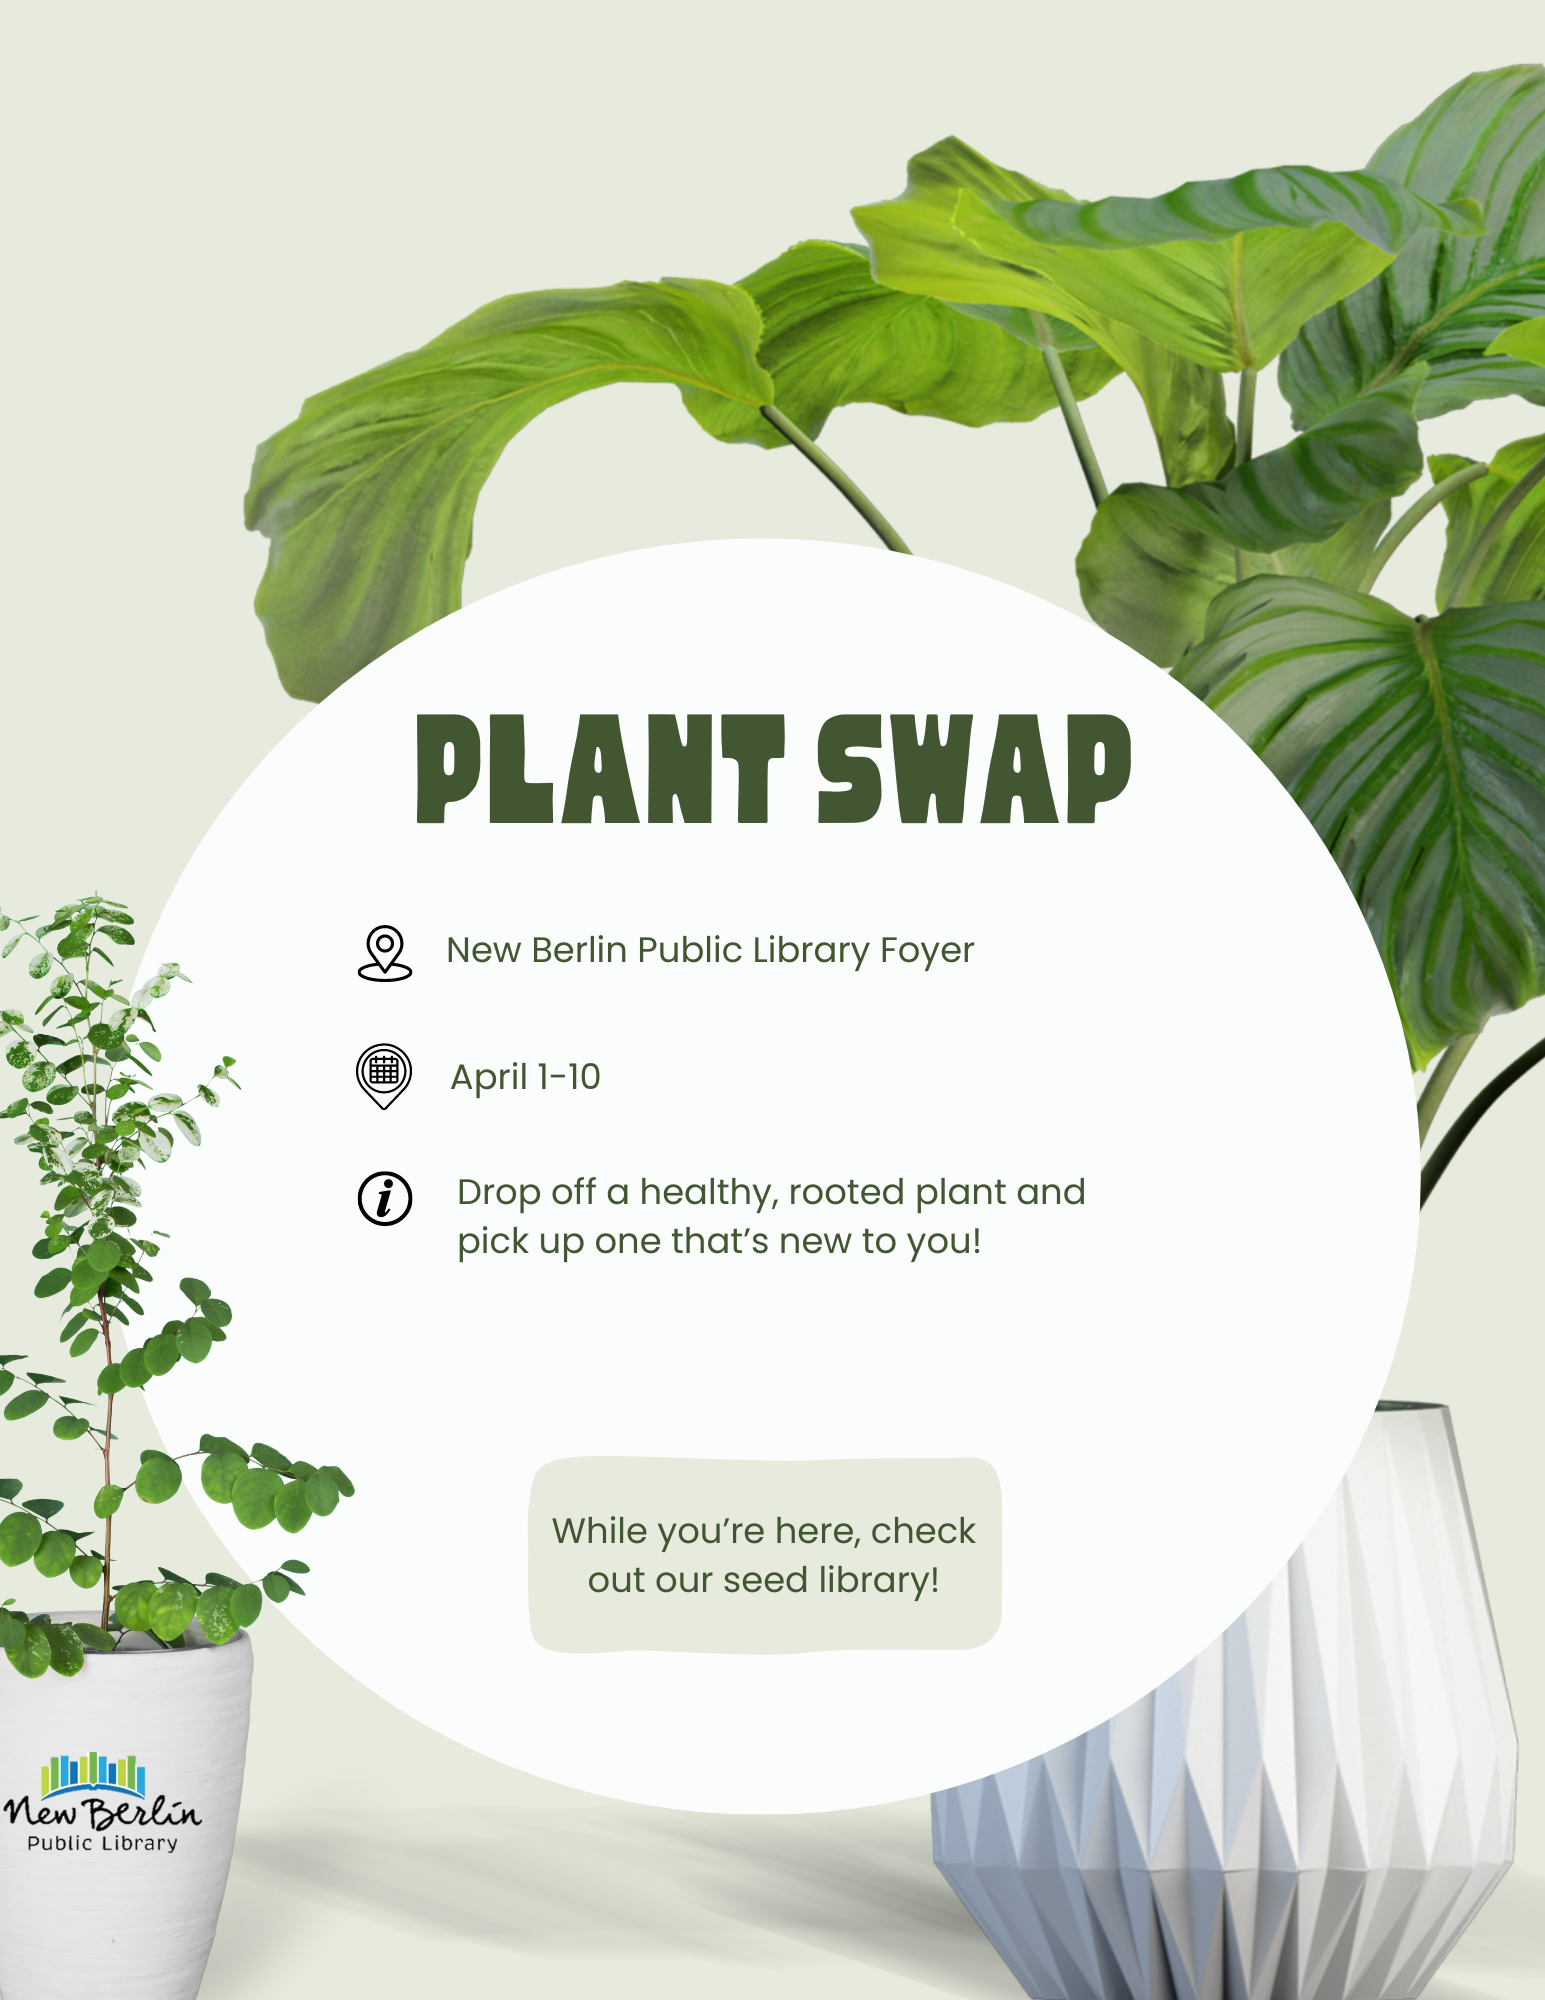 Plant Swap in the library foyer from April 1 to 10. Bring a healthy plant, and swap it for a new one!